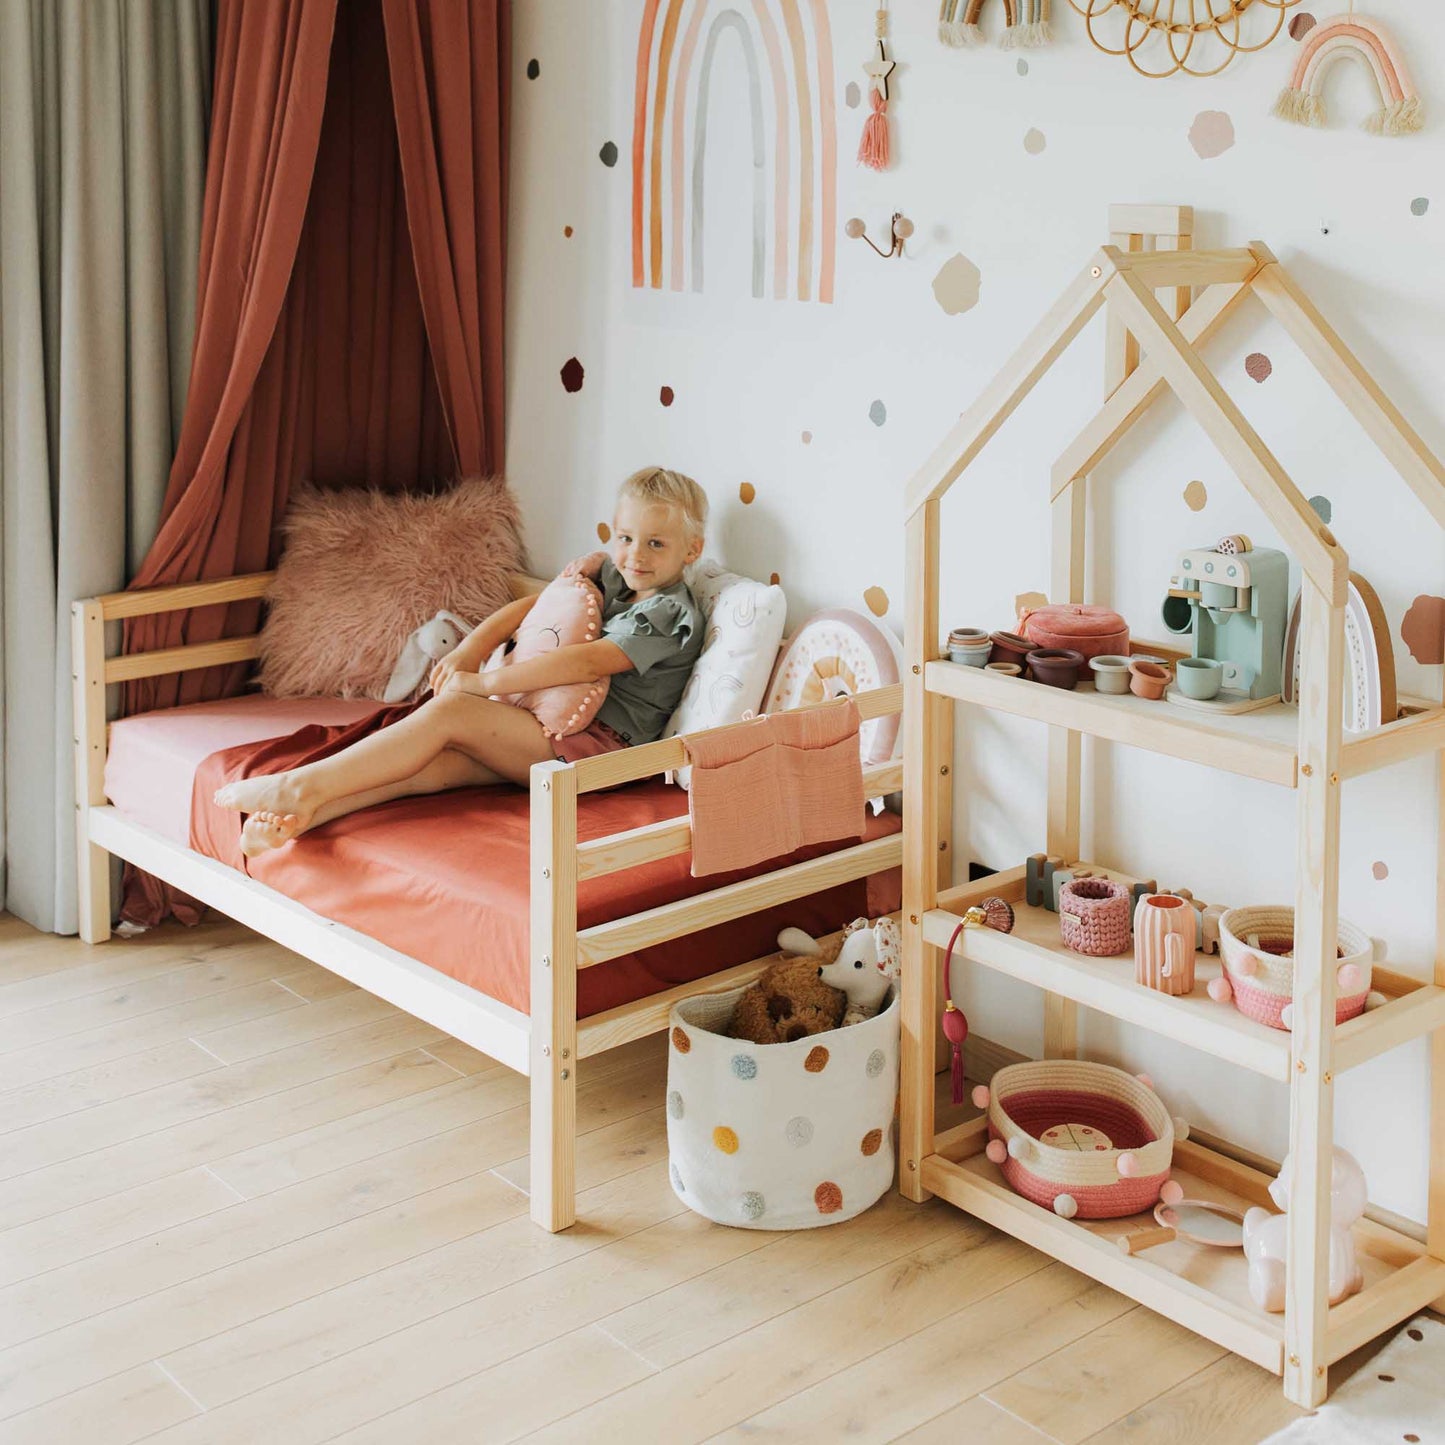 A girl is sitting on a Sweet Home From Wood kids' bed on legs with a 3-sided horizontal rail in a child's room.